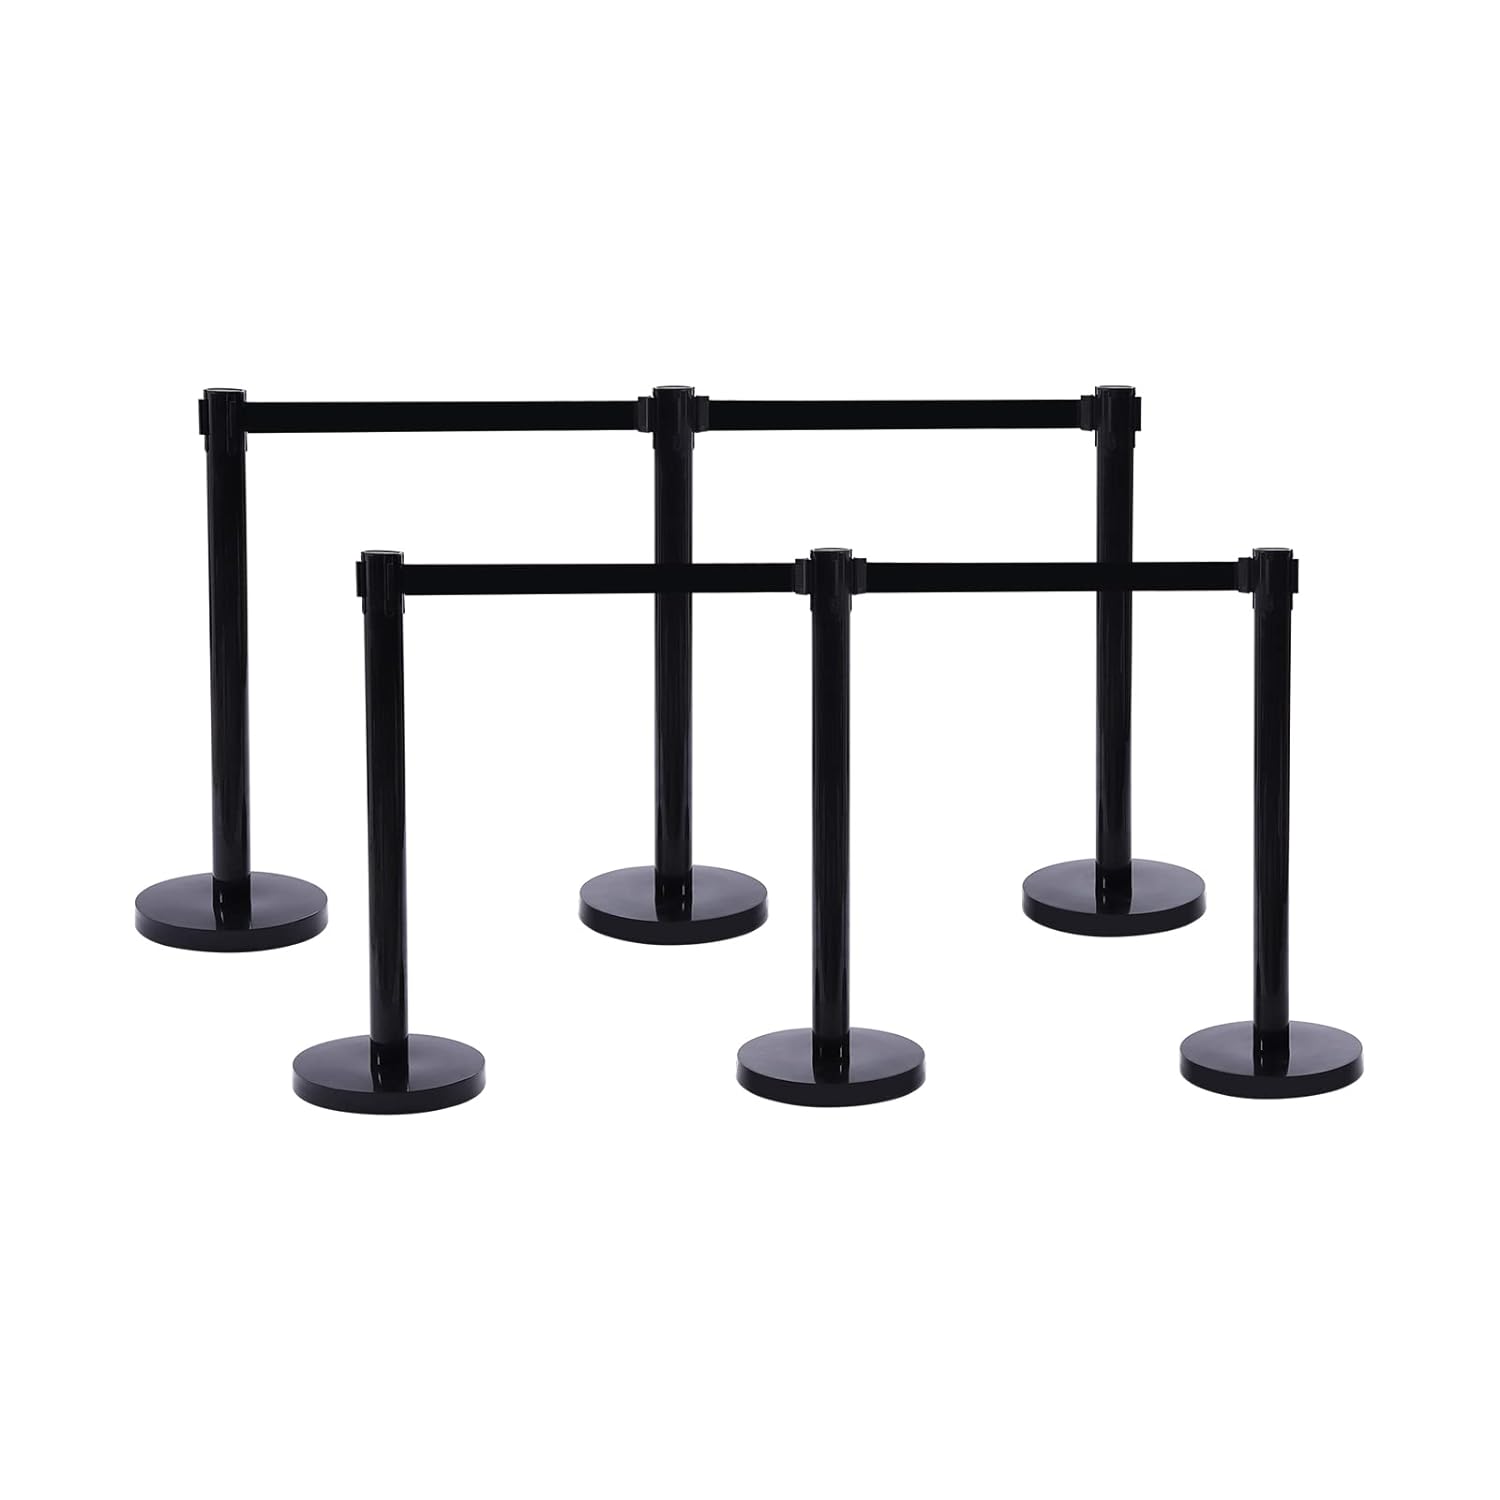 Generic Crowd Control Stanchion,Set of 6 Pieces Stanchion Set,Crowd Barriers Pole with 6.5ft Retractable Belt and Sturdy Base